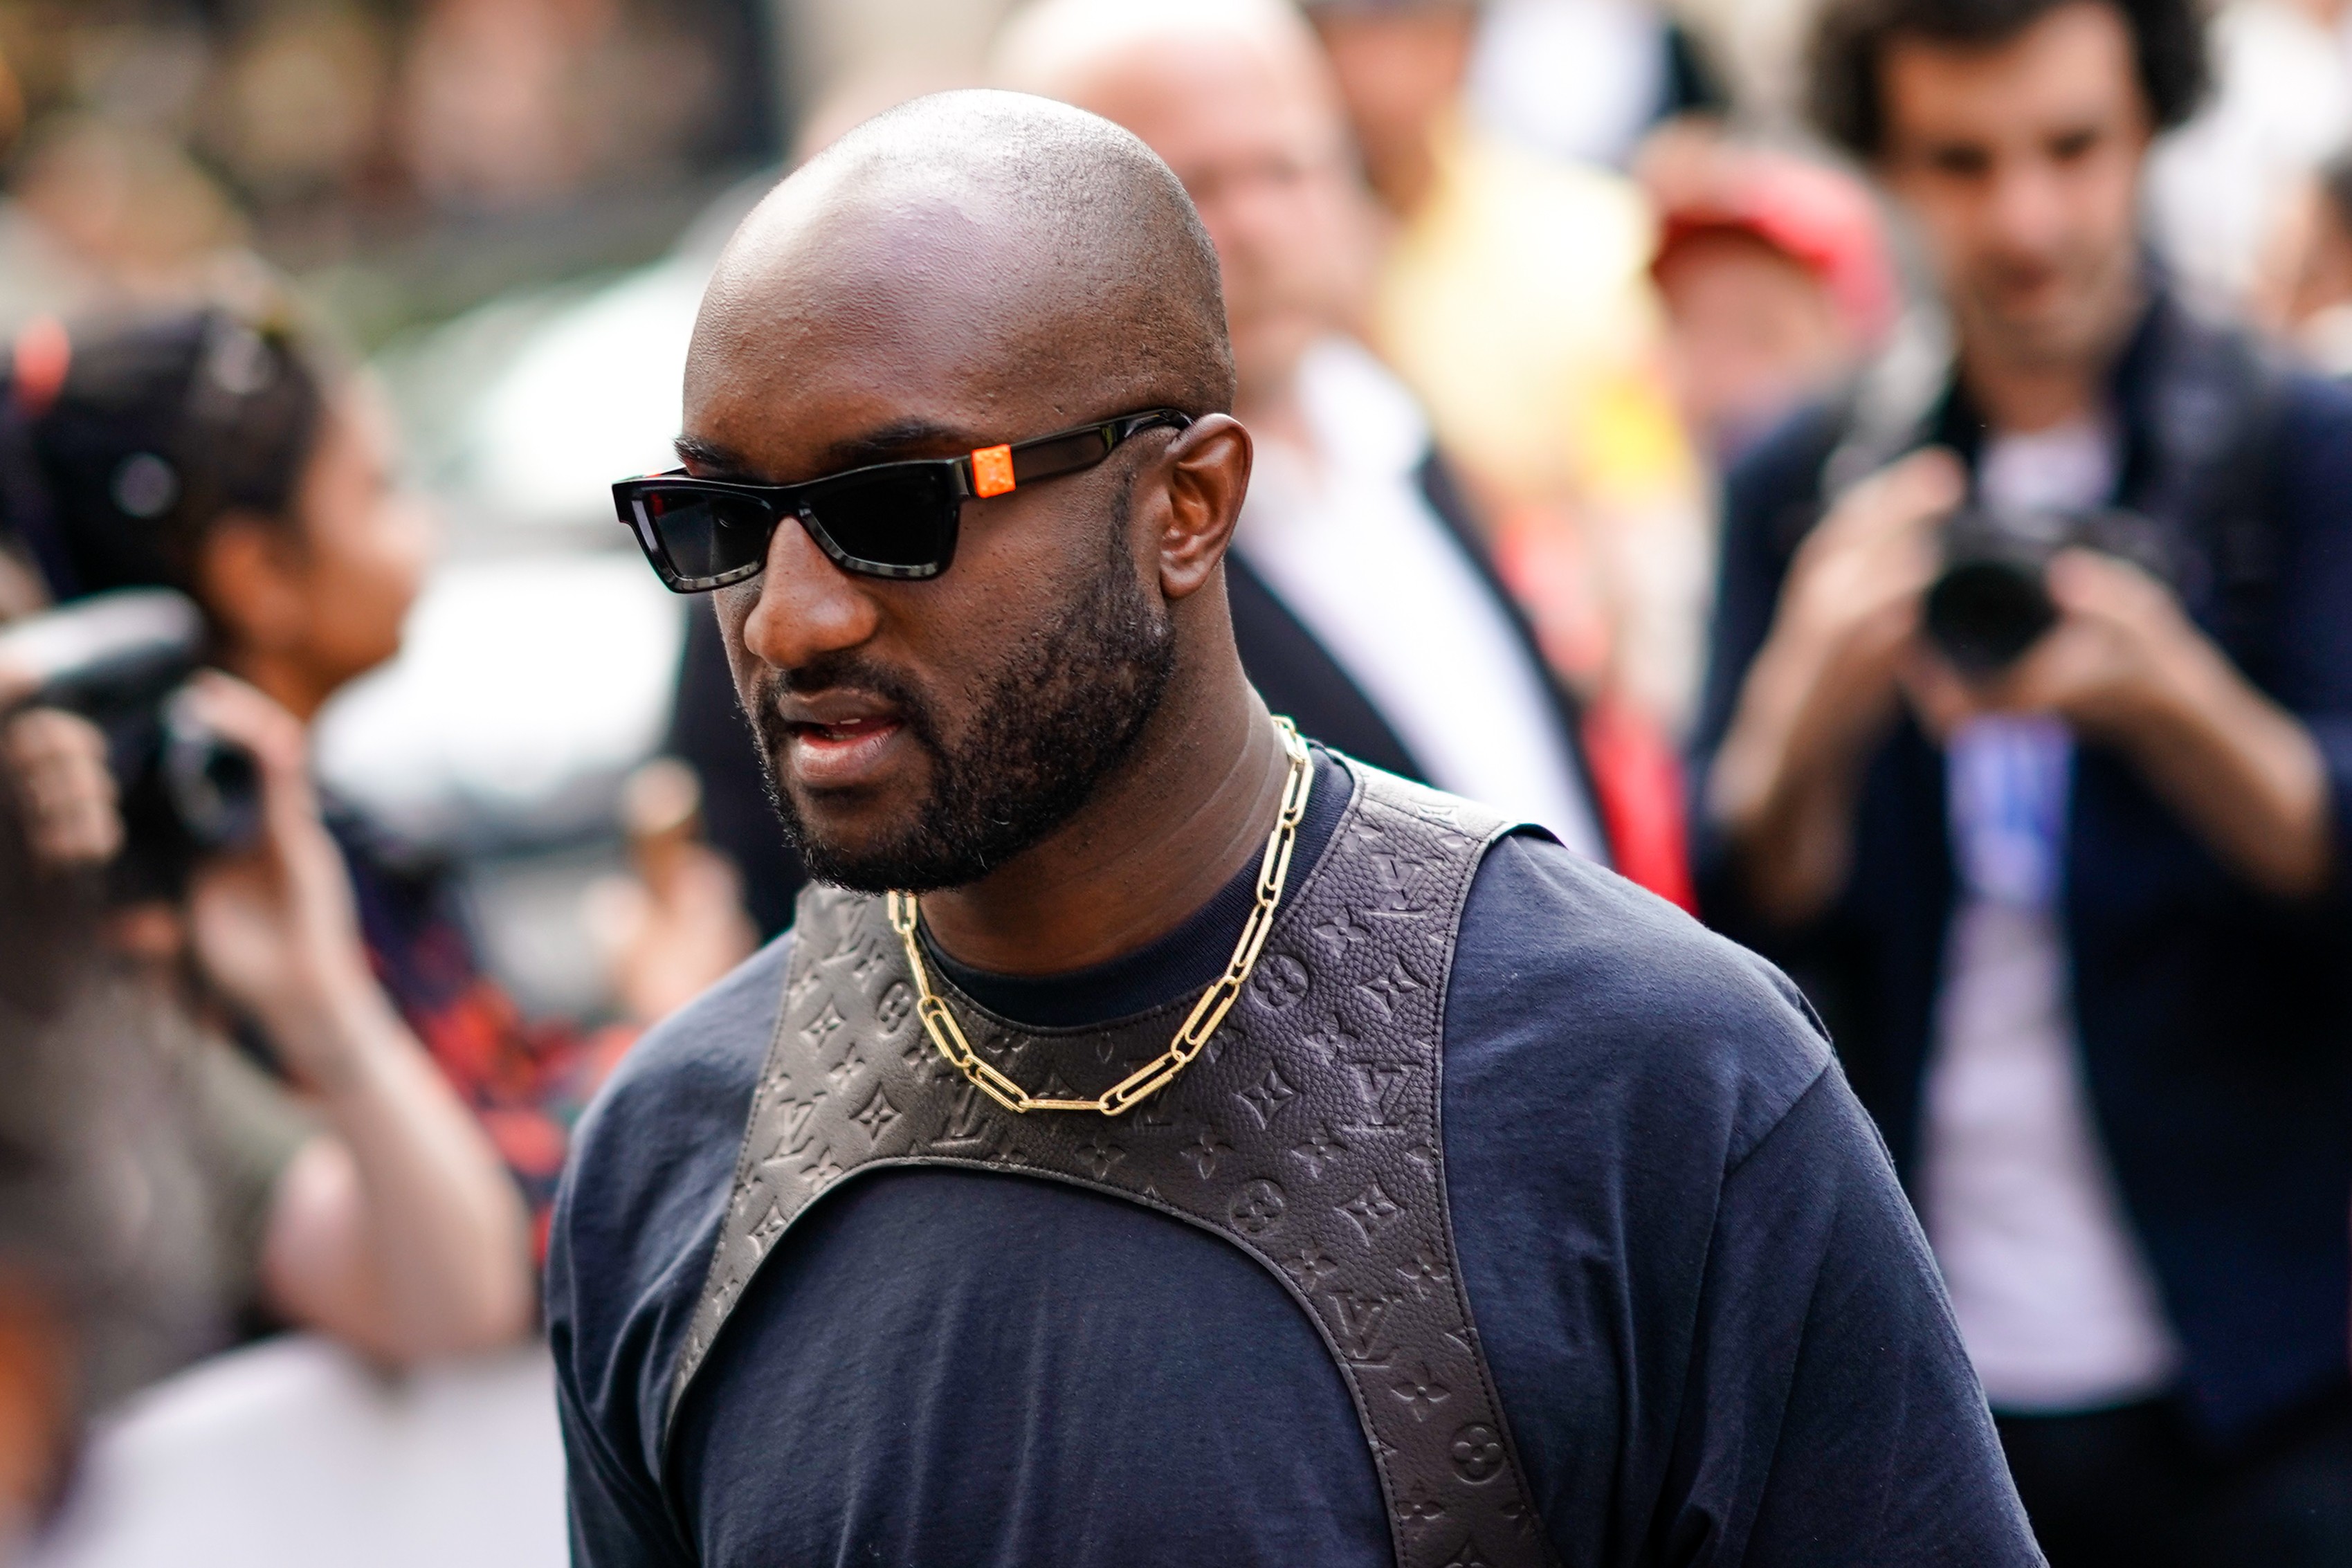 What happened at Virgil Abloh's first day at Louis Vuitton (we